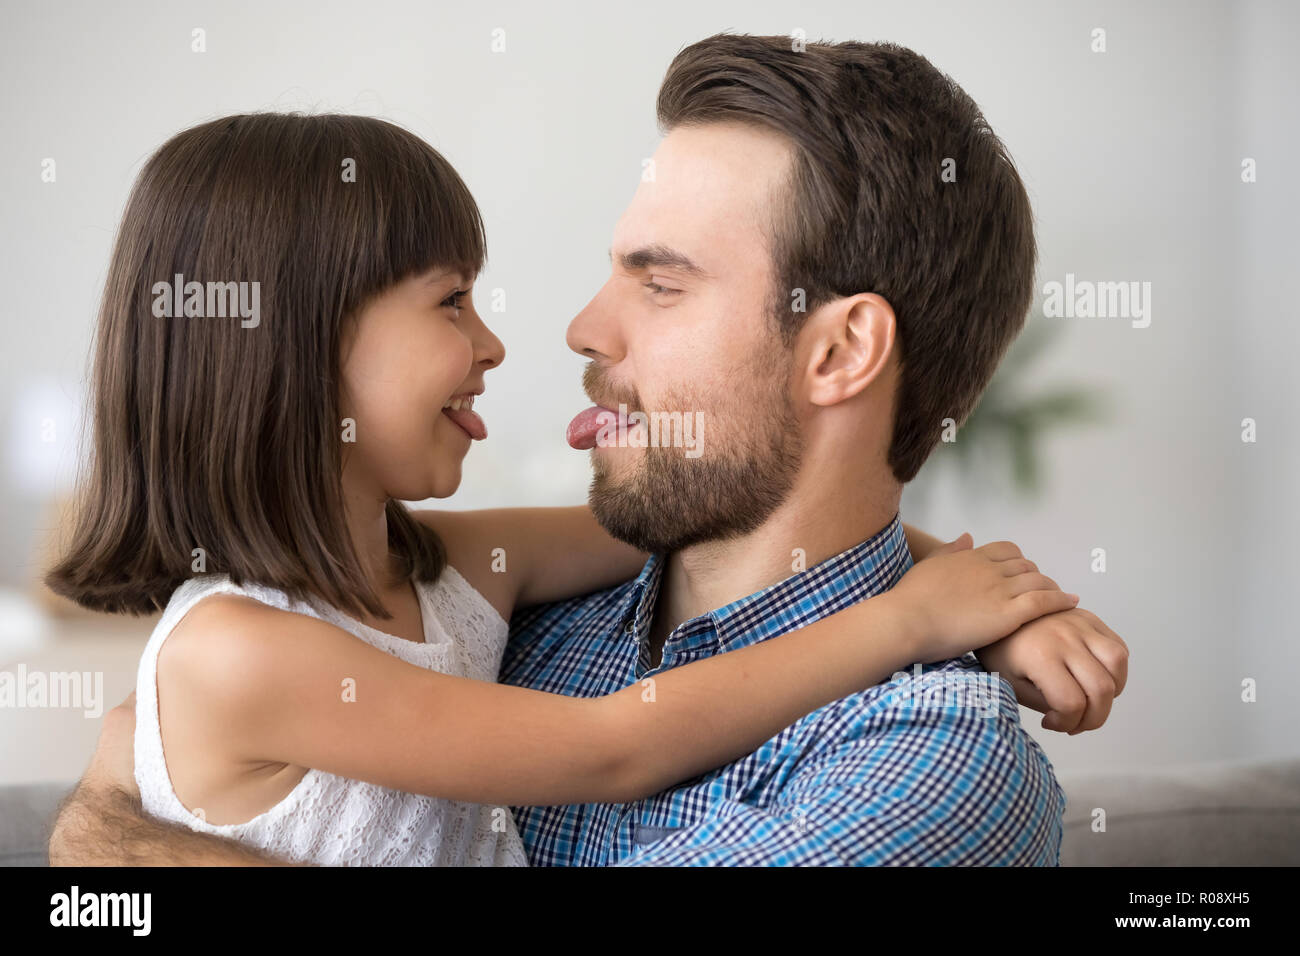 Father and daughter having fun showing each other tongues Stock Photo